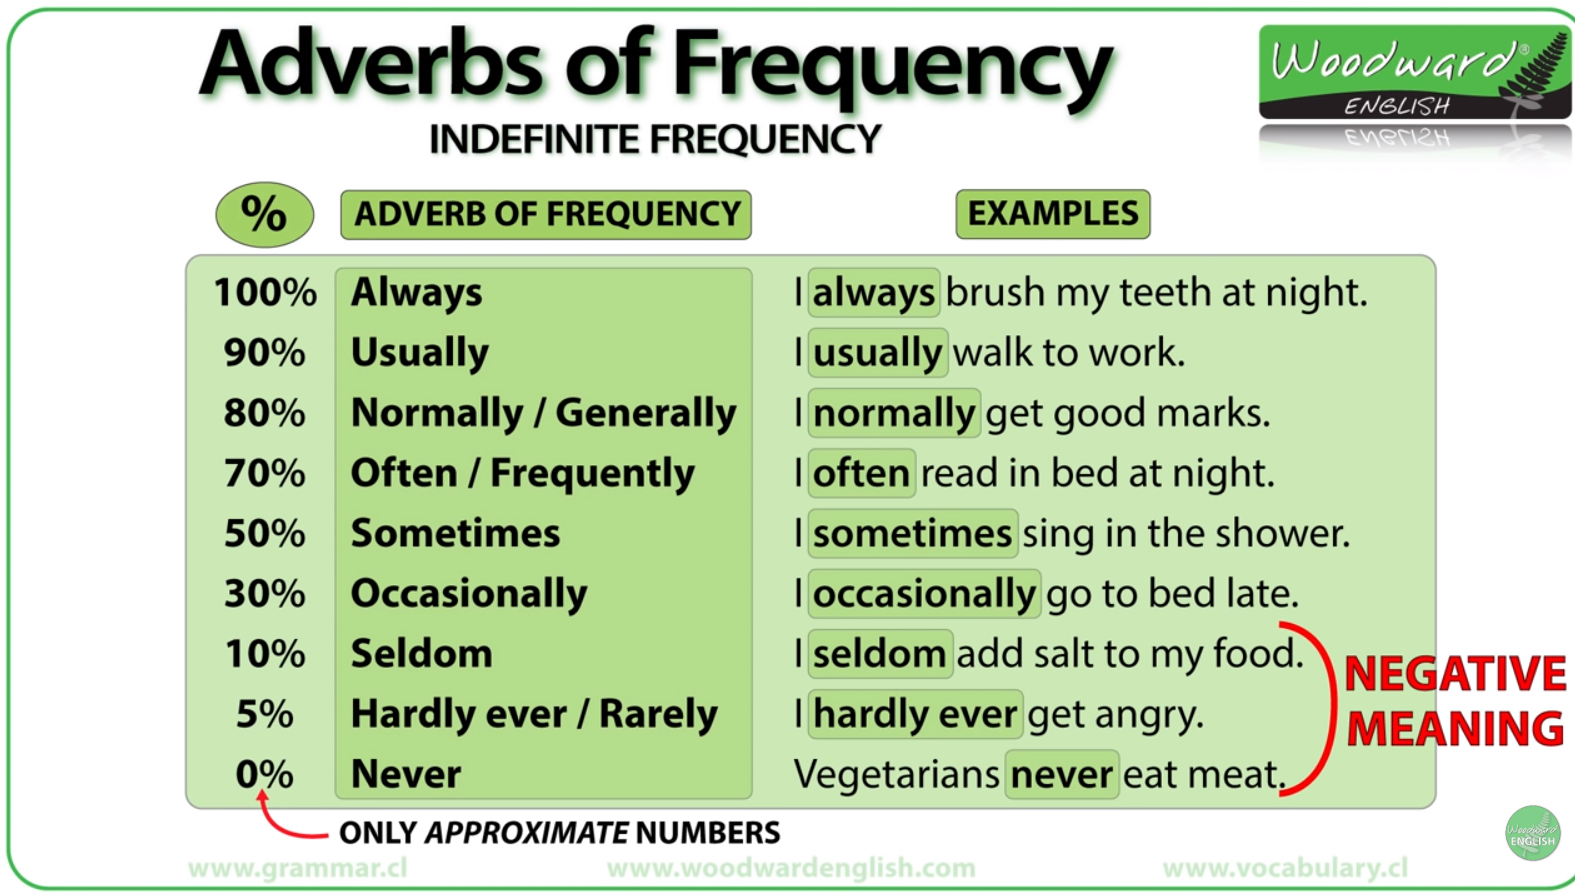 Wordwall sentences. Adverbs of Frequency. Adverbs of Frequency in English. Adverbs and expressions of Frequency правило. Frequency adverbs грамматика.